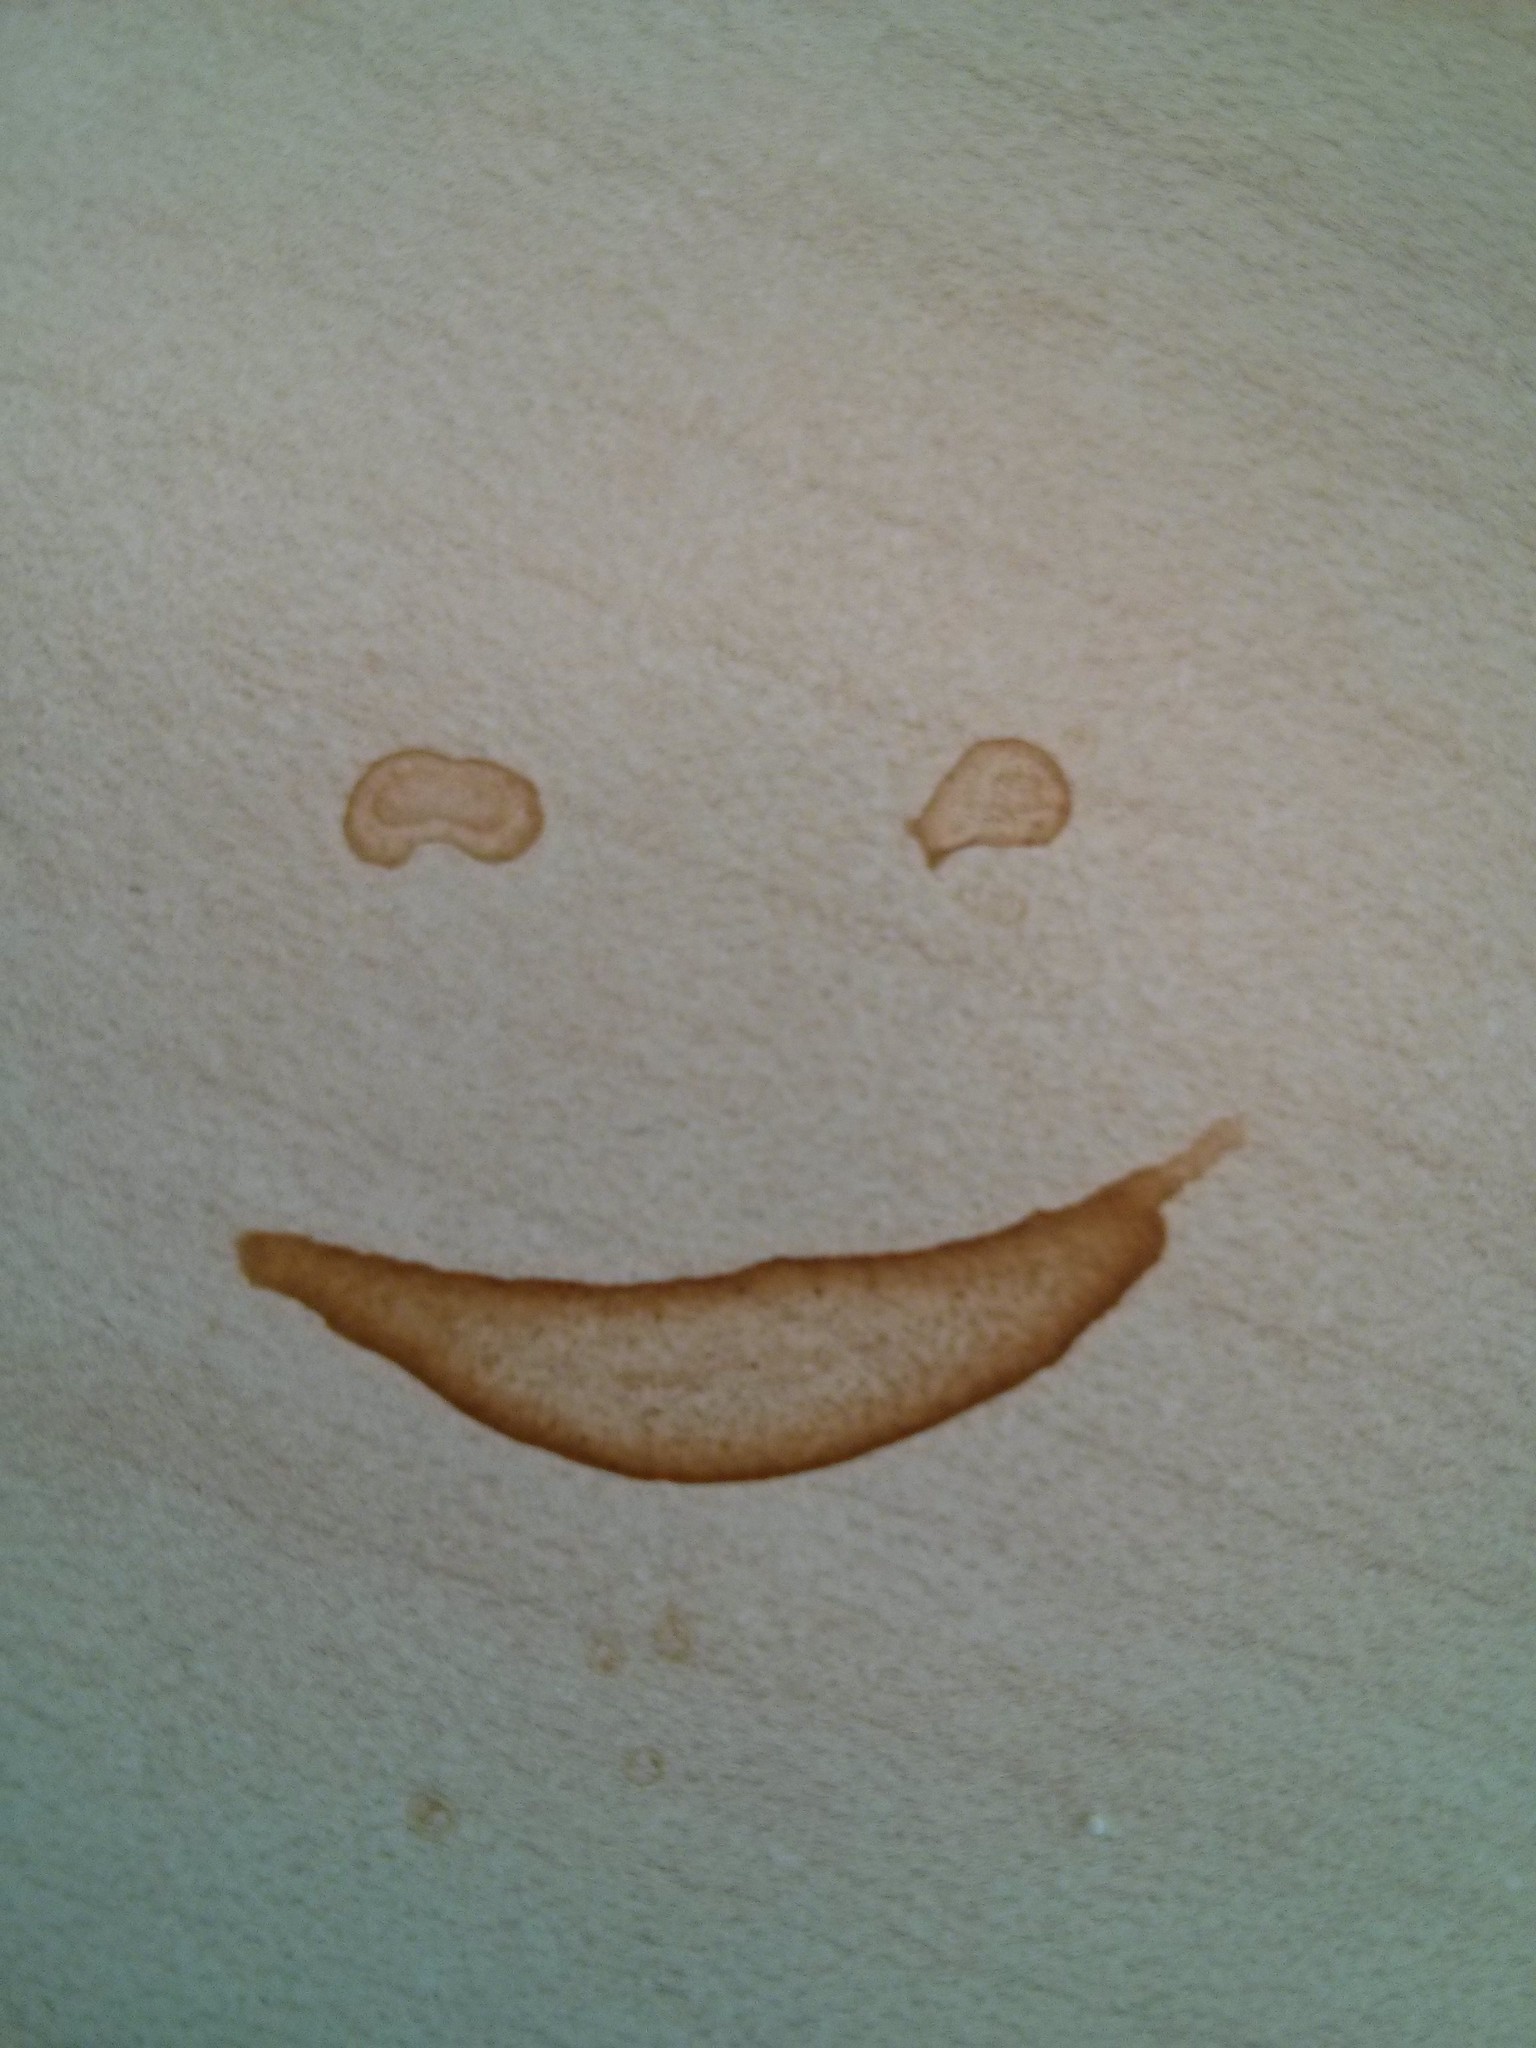 Smiley face in a coffee stain